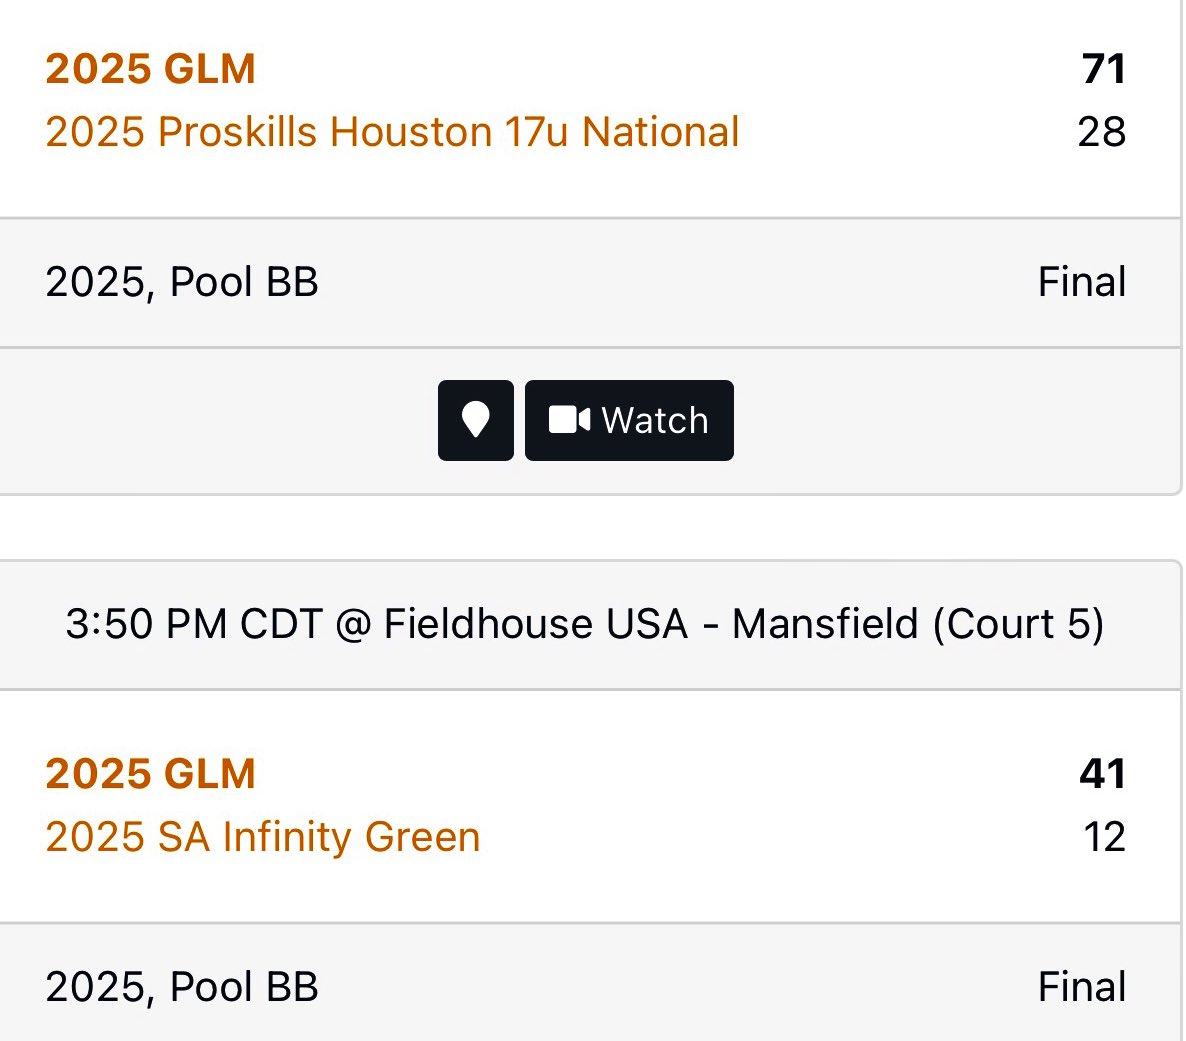 CONGRATS to Coach Clarissa Davis-Wrightsil & Georgetown Magic 17U National team on your 2 wins today at Heart of Texas vs Houston ProSkills & SA Infinity Green. Always great when our school team can be competitive vs all-star teams #MarchDoesntStartInMarch #EFND💙